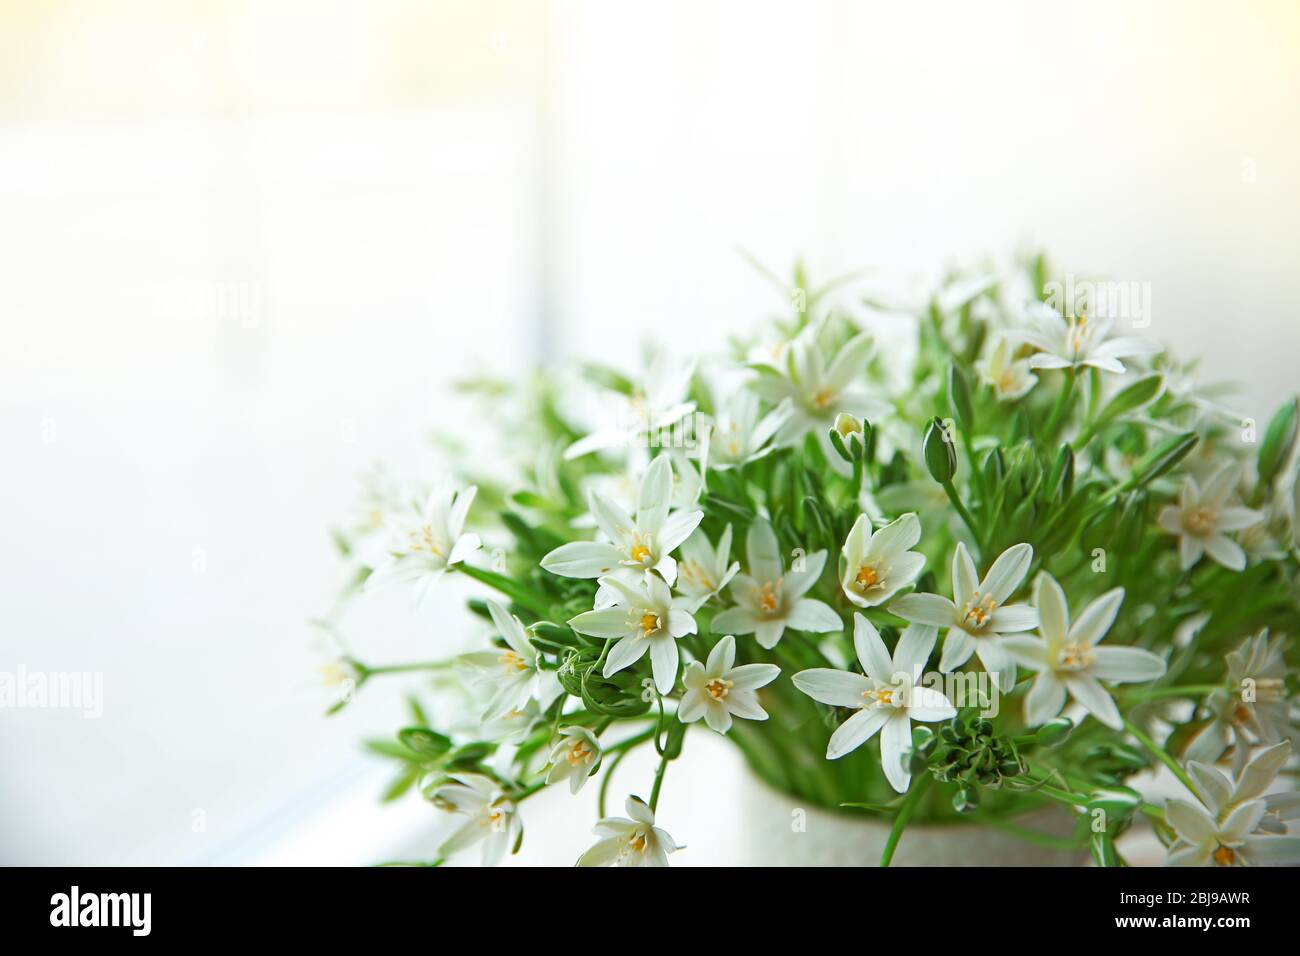 Bouquet of little white flowers on light background Stock Photo